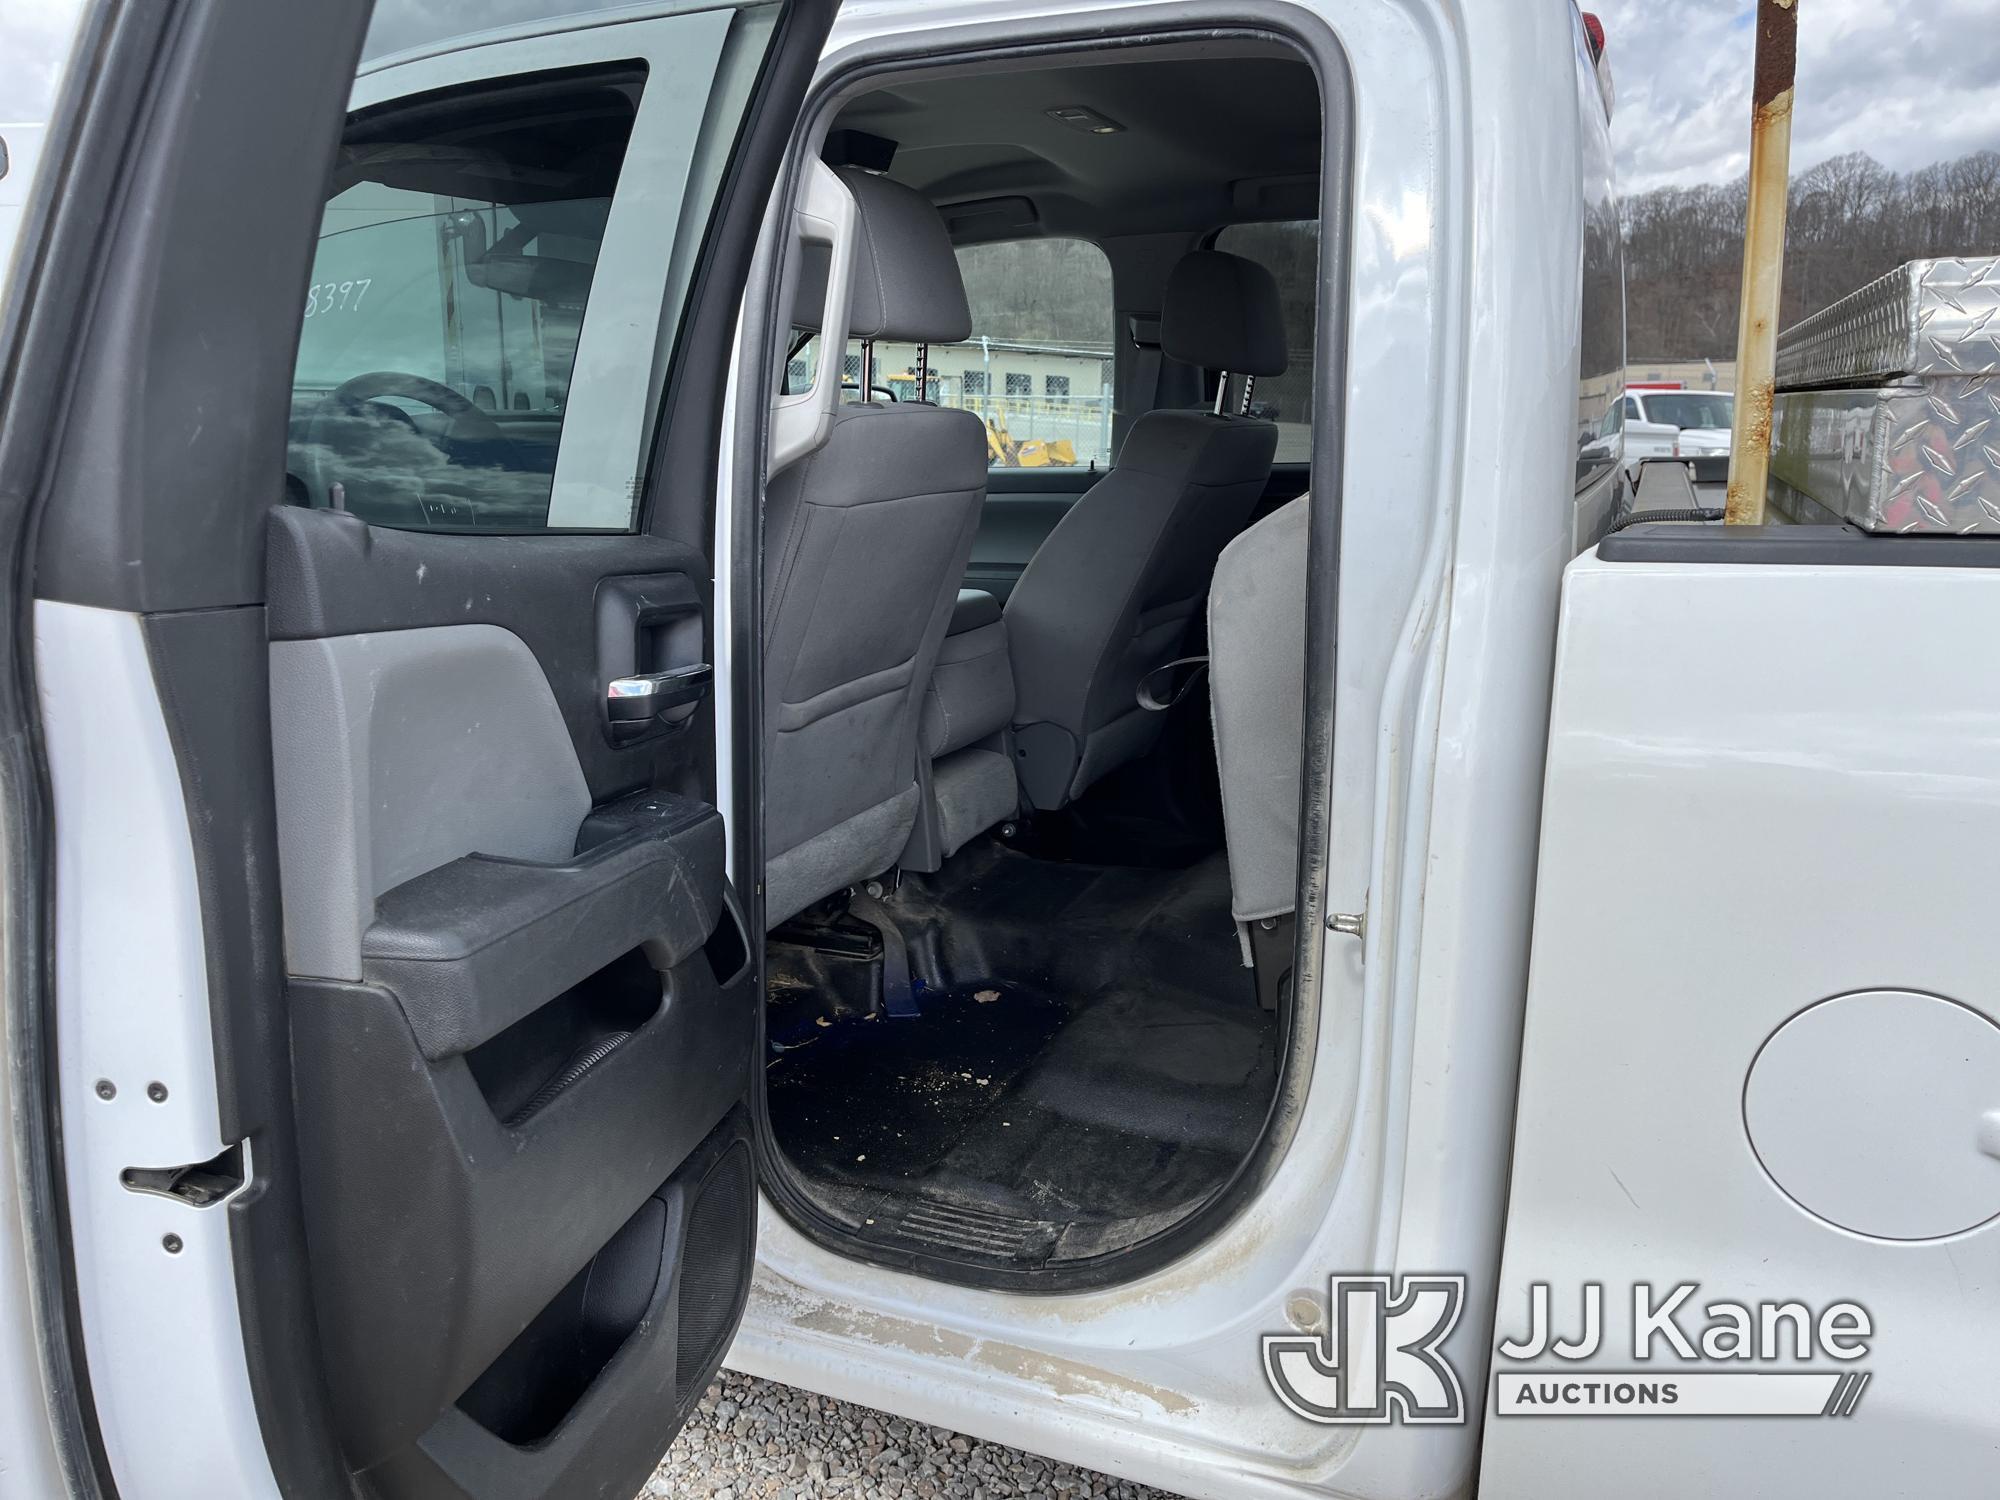 (Smock, PA) 2016 GMC Sierra 1500 4x4 Extended-Cab Pickup Truck Title Delay) (Runs & Moves, Check Eng